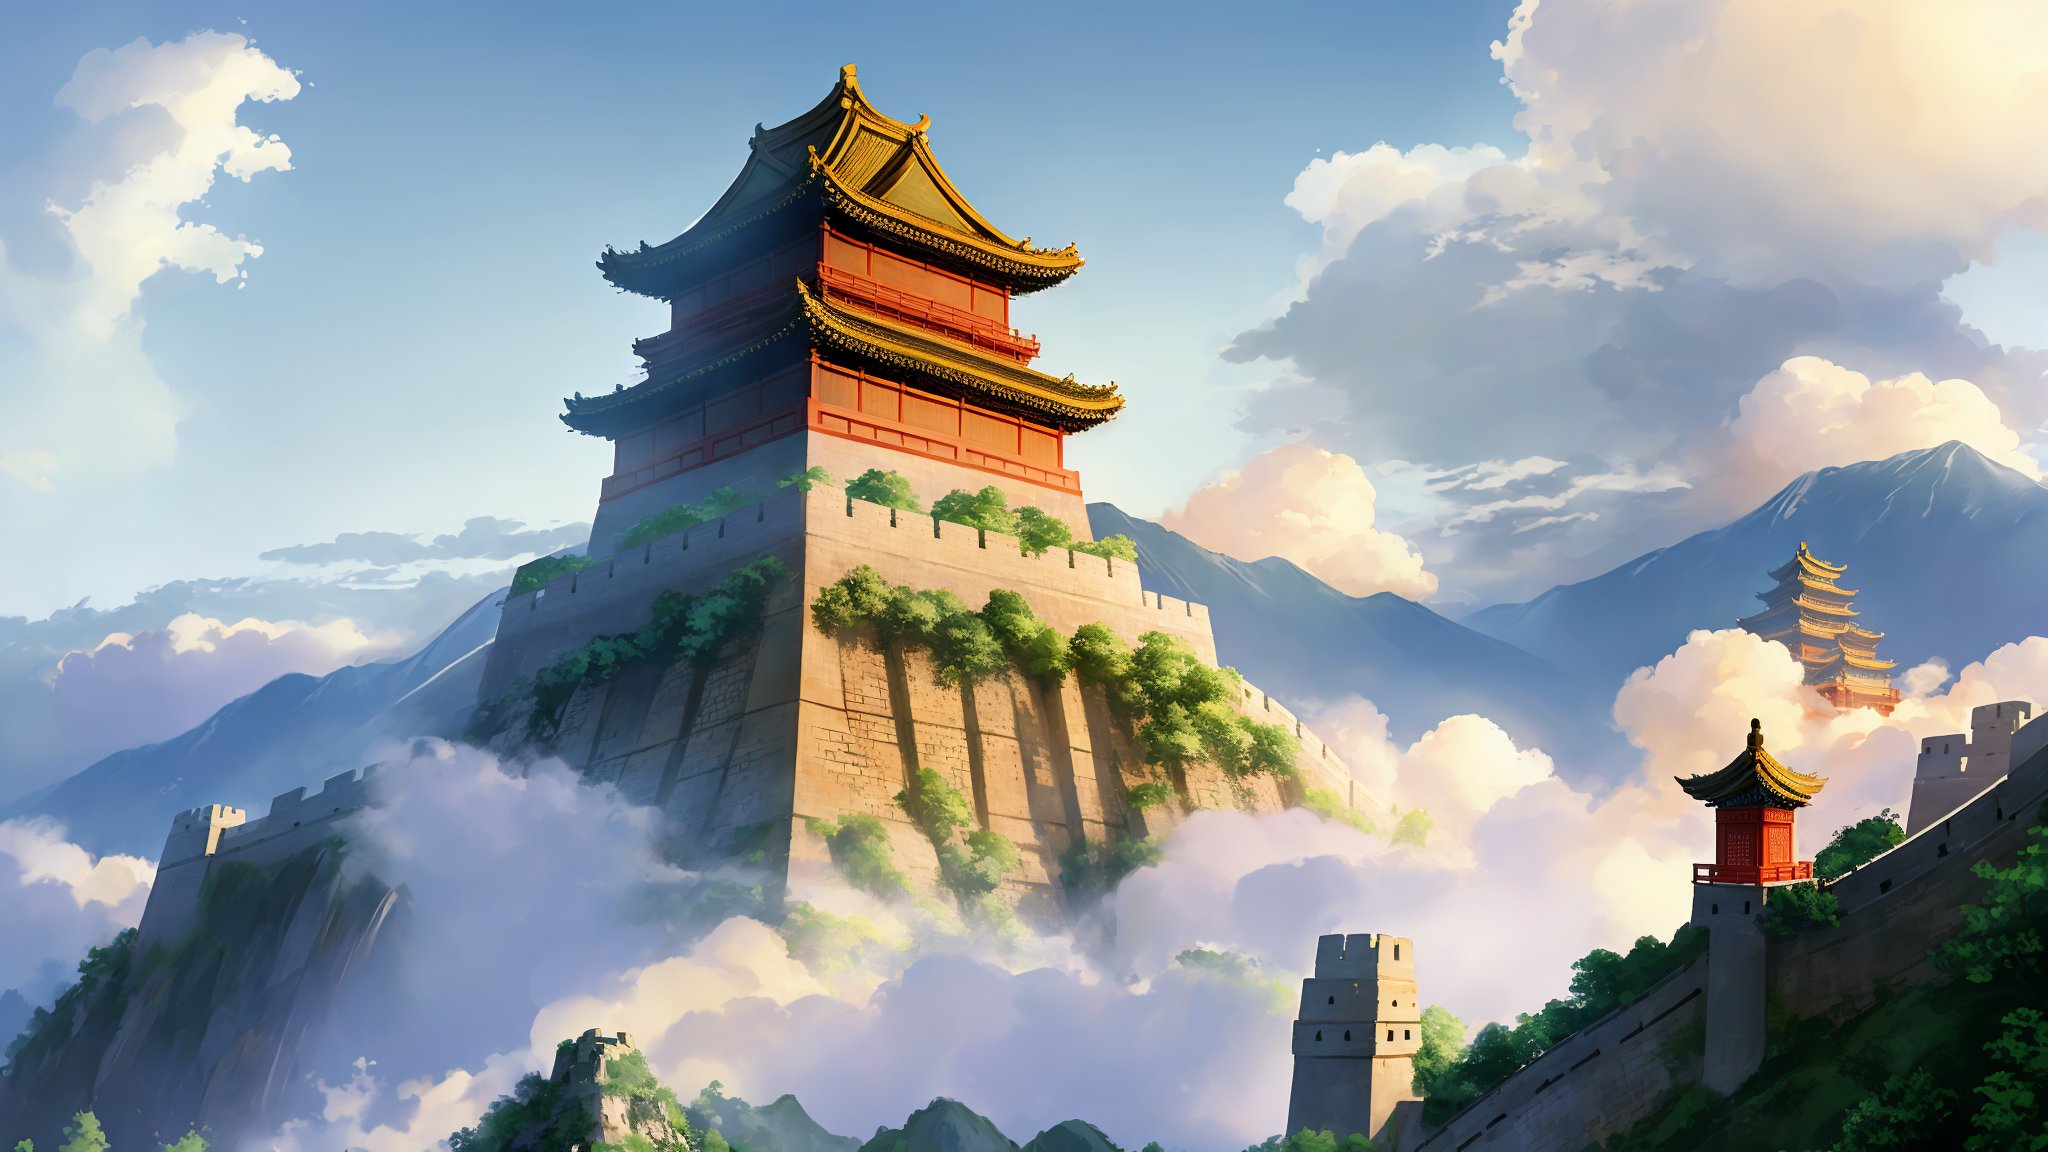 Inspired by ancient Chinese mythology, a city gate whose architectural style resembles the ancient Great Wall of Shanhaiguan stands among the clouds and mist of the fairyland.